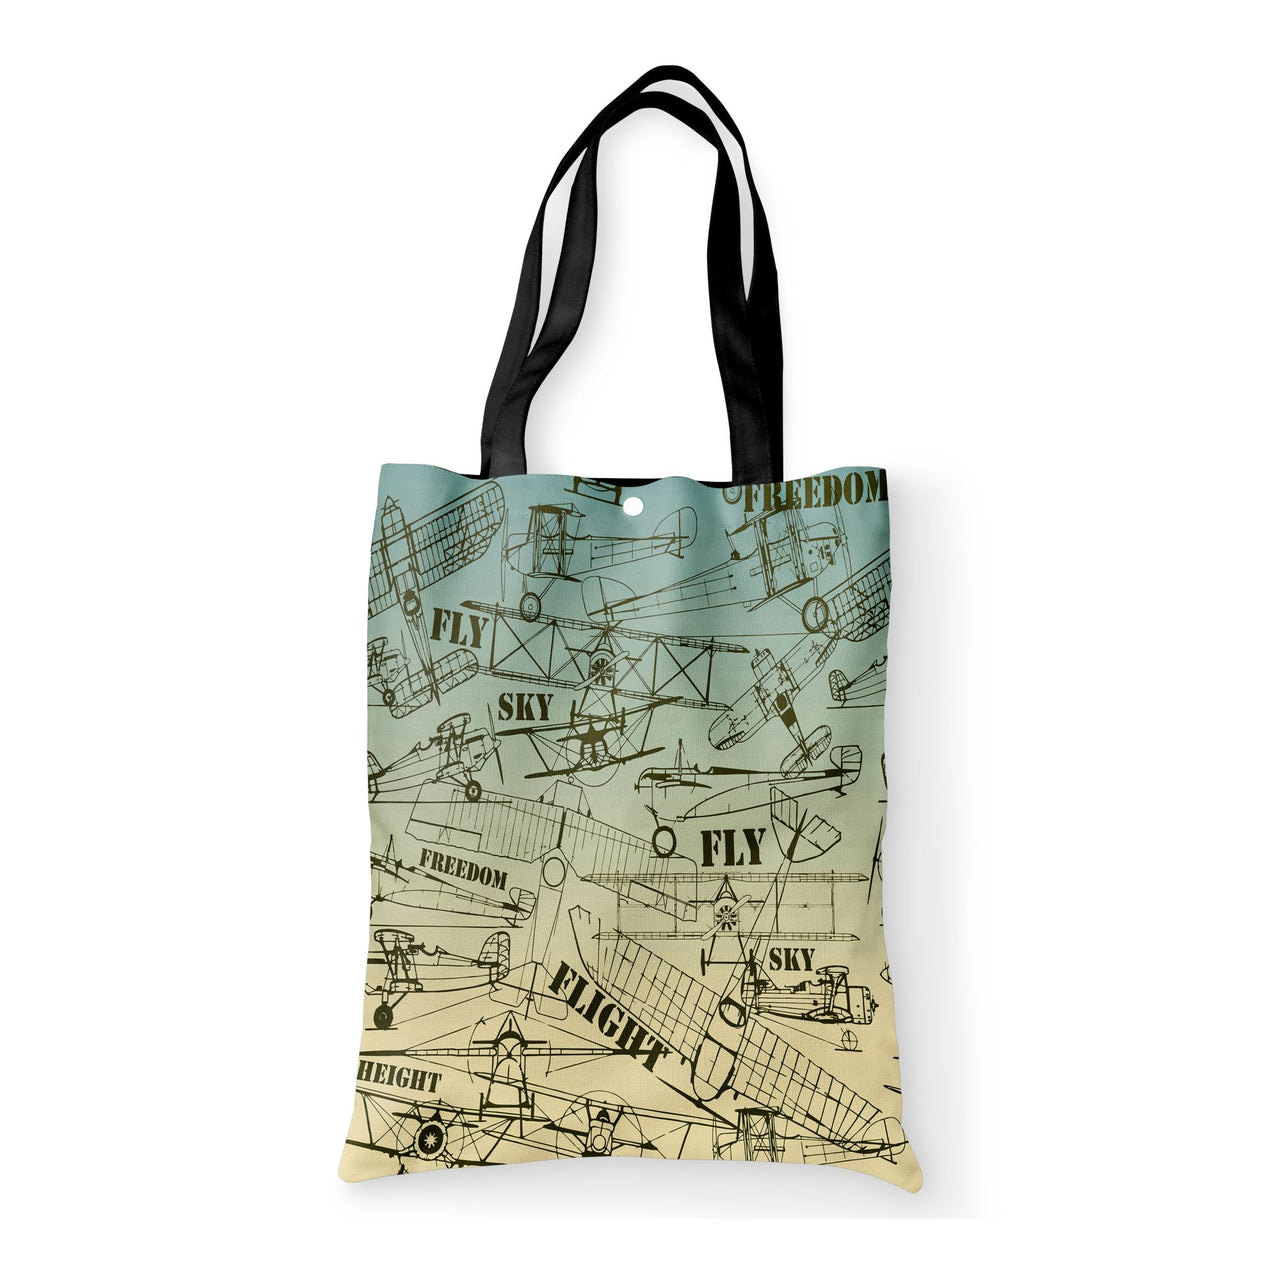 Retro Airplanes & Text Designed Tote Bags